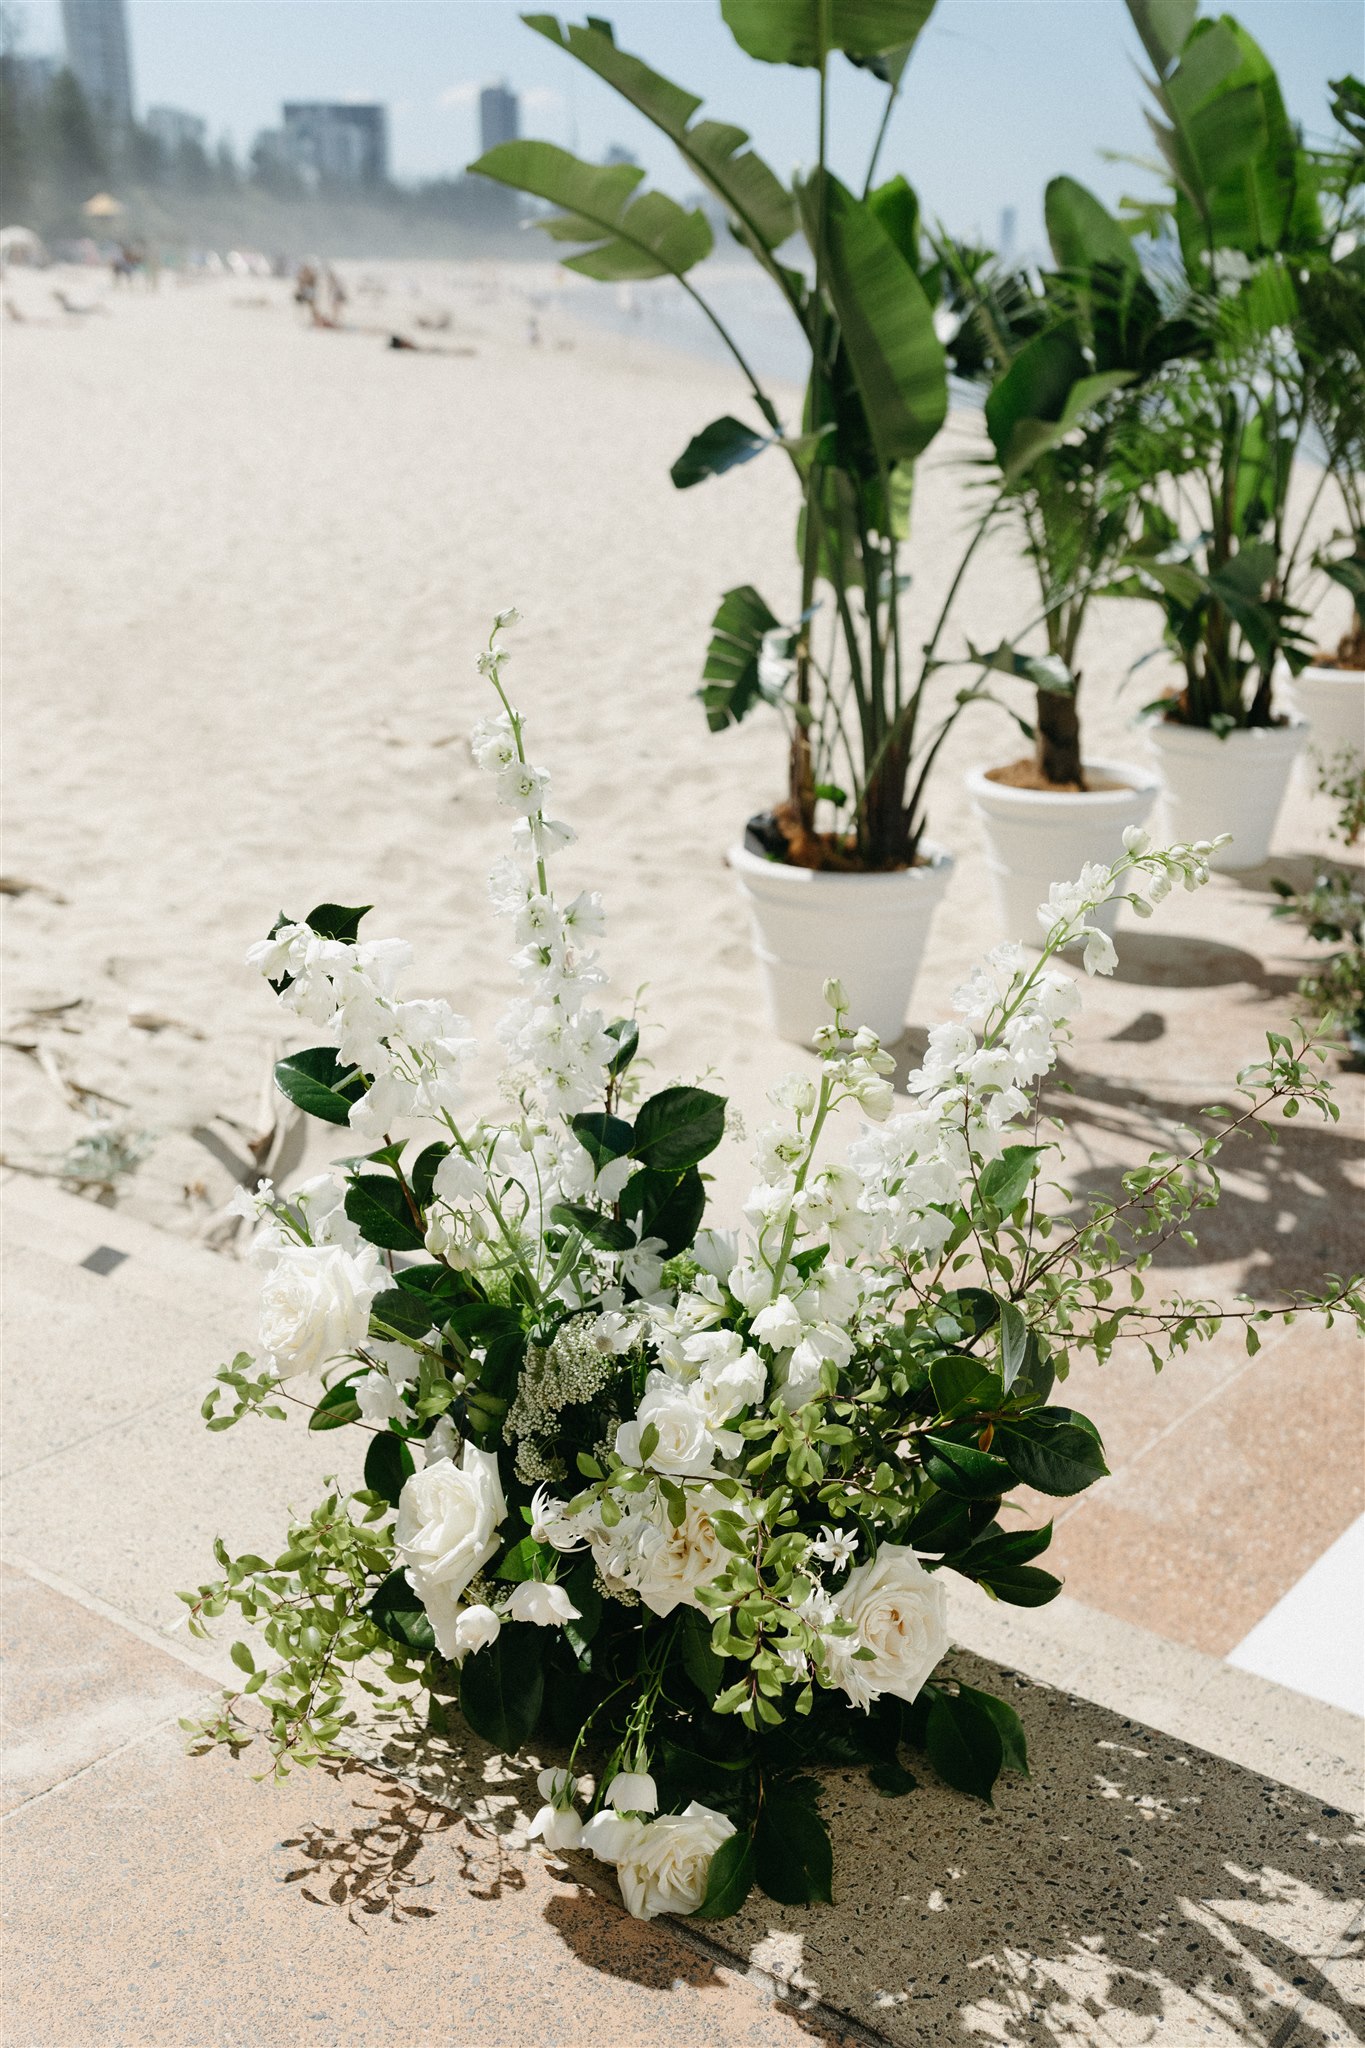 Nicole + Andy's Coastal Luxe Wedding at Rick Shores, Gold Coast Wedding Venue | The Events Lounge